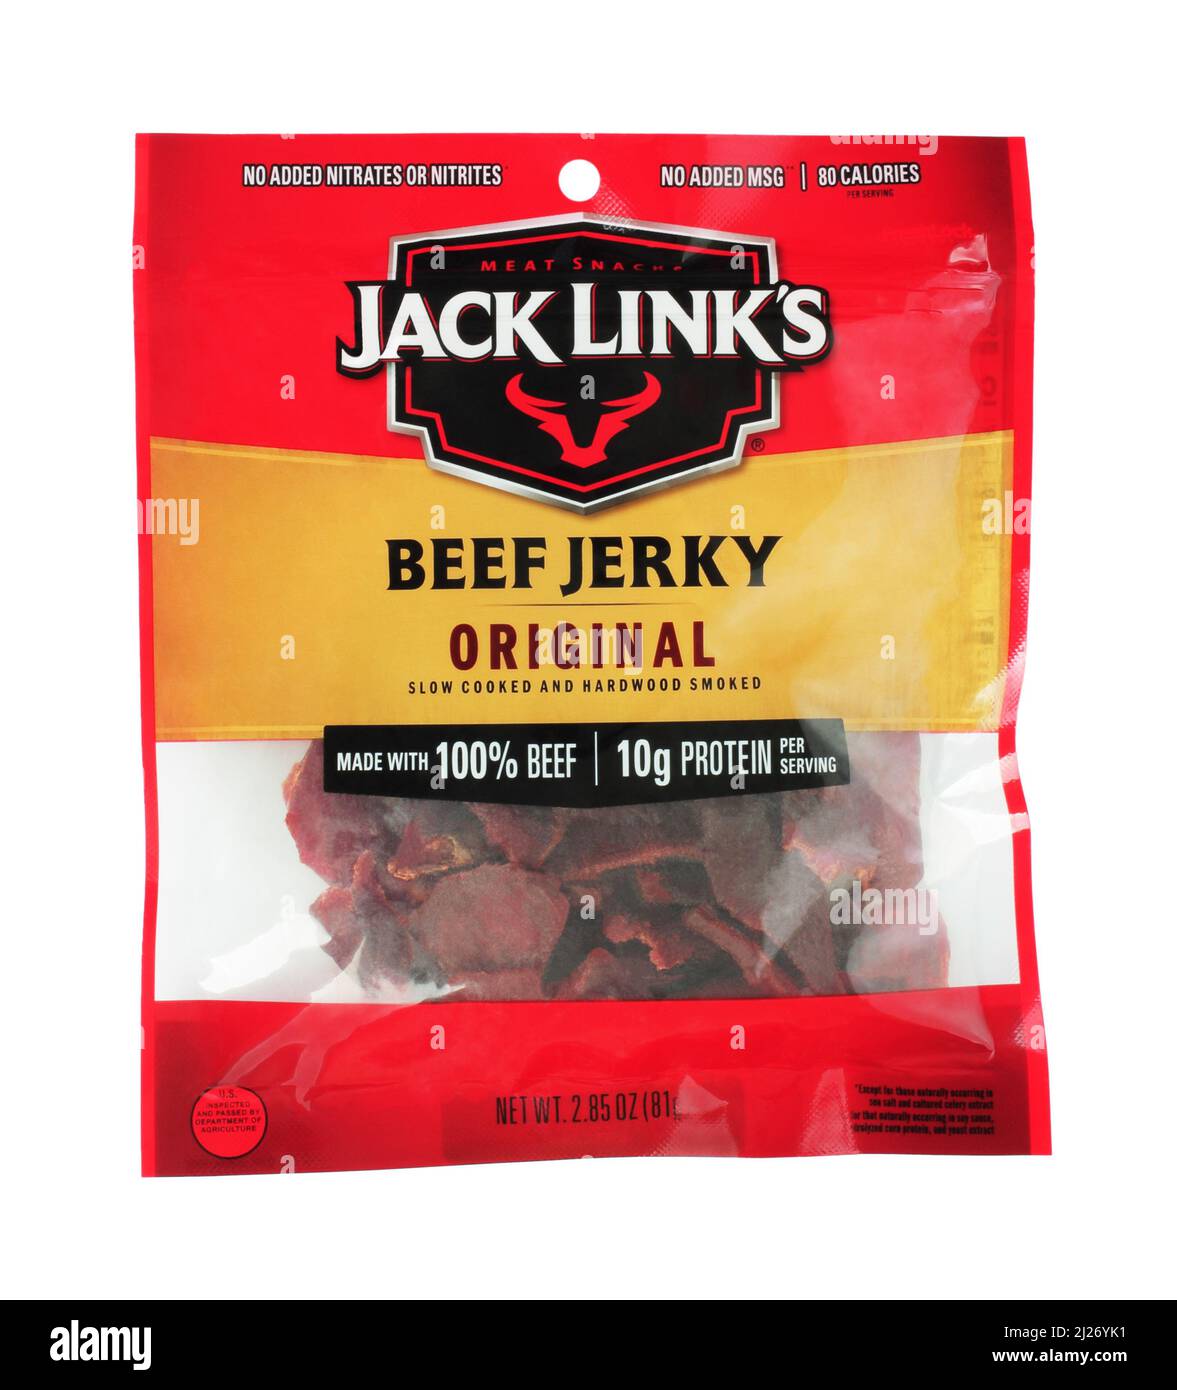 Kiev, Ukraine - January 27, 2022: Jack Link's Beef Jerkly meat snacks package, on white background. Link Snacks, Inc., better known as Jack Link's, is Stock Photo